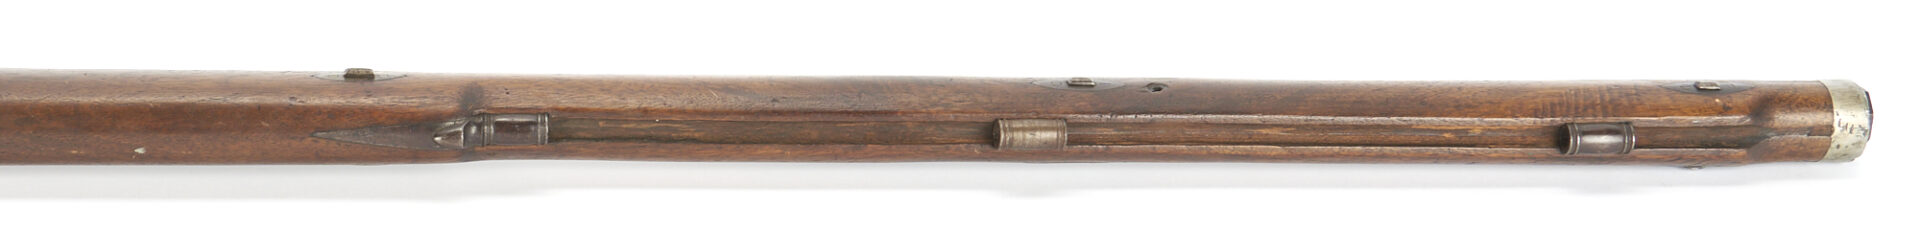 Lot 520: European Target Percussion Rifle, "M. Furrer" .44 cal; Walter Cline Collection